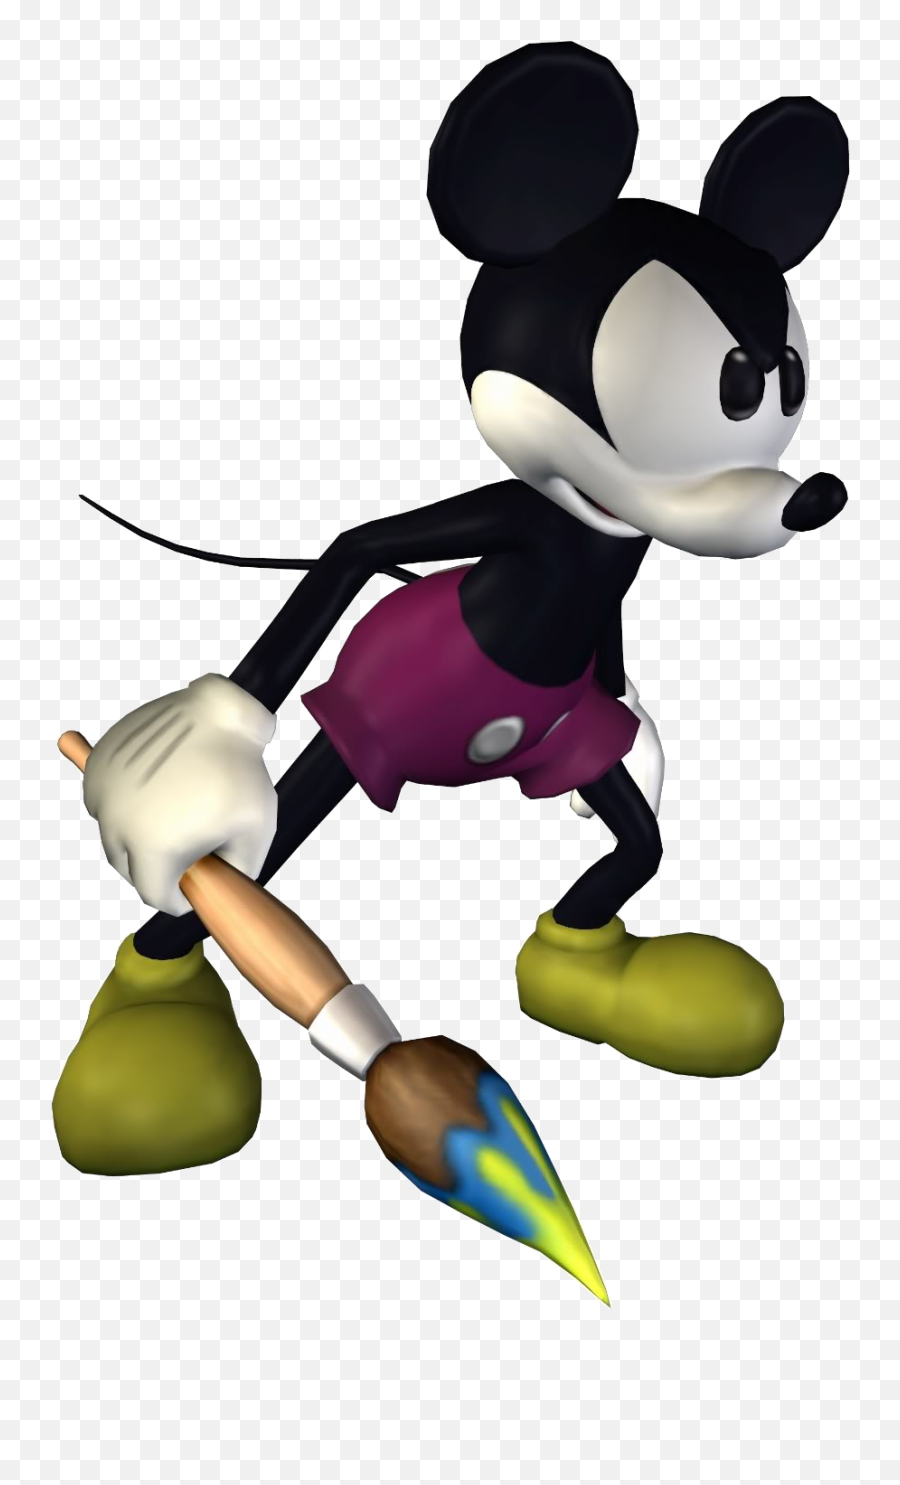 Download Free Png Image - Scrappermickeypng Epic Mickey Hero Mickey Epic Mickey,Mickey Png